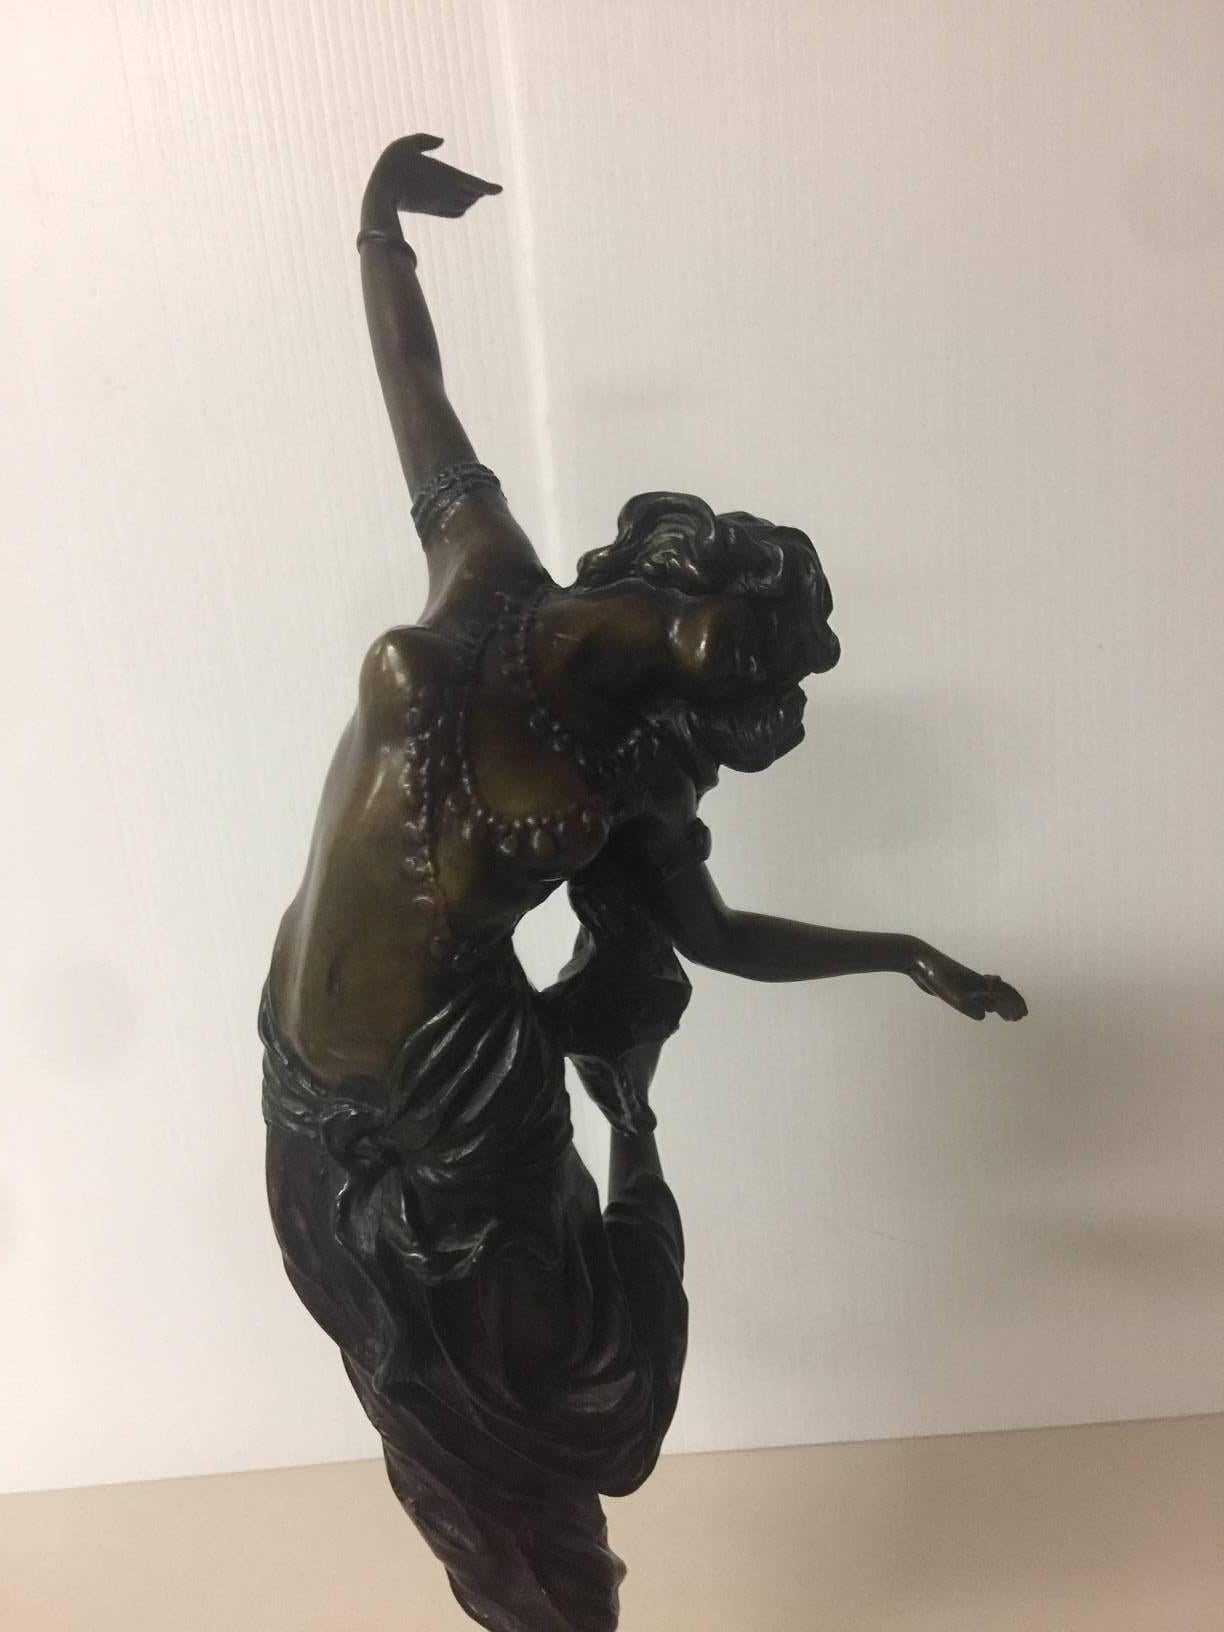 Stunning Art Deco patinated gilt bronze statue entitled 'Oriental Dancer' by Claire Jeanne Roberte Colinet, circa 1920s. The dancers long hair winding down her back, bare breasted with a selection of necklaces and harem pants, one leg raised mid